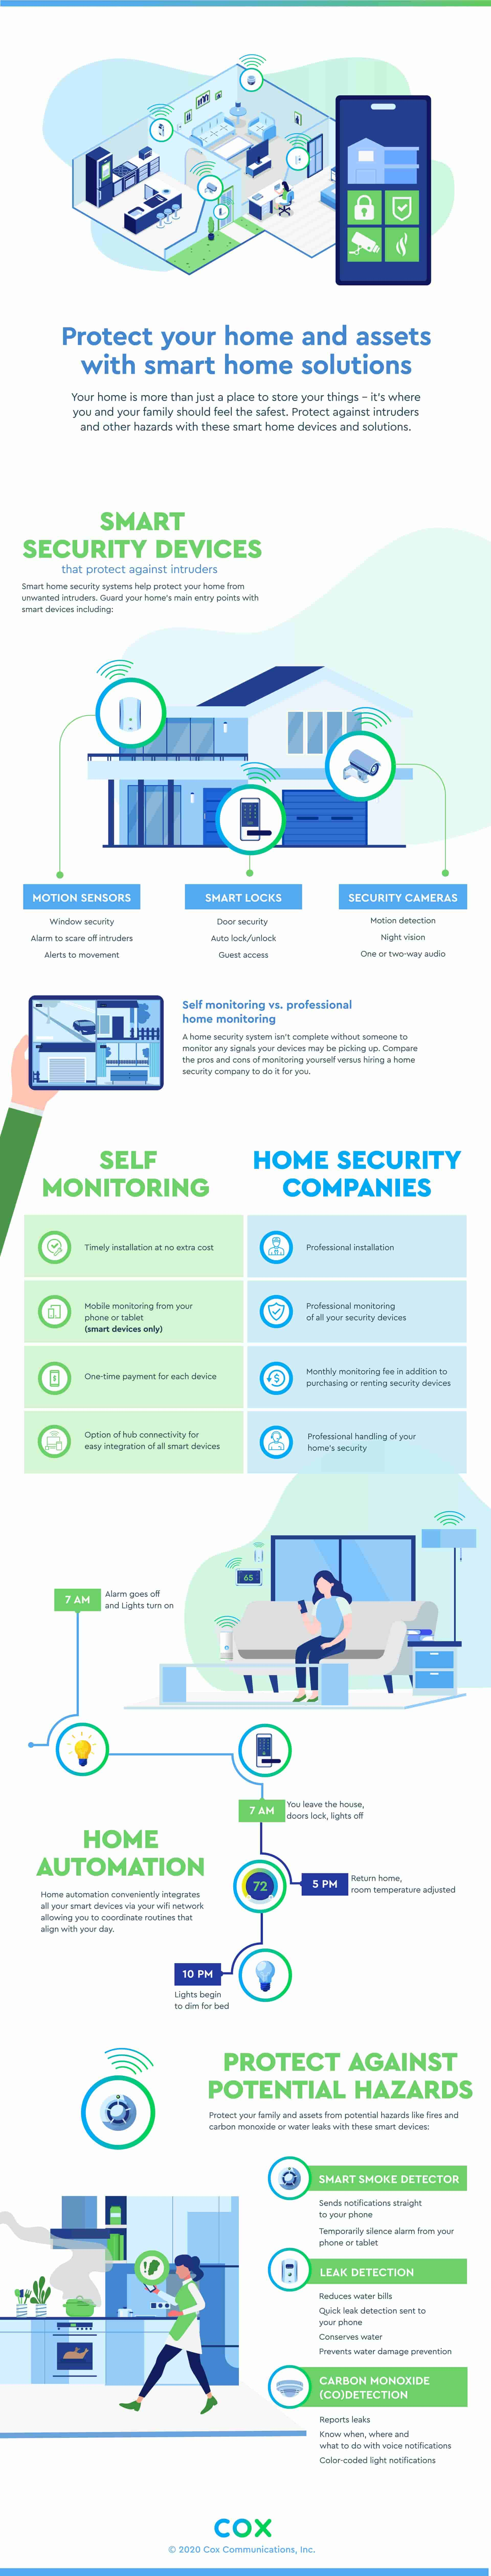 Homeowner’s Guide to Smarter Home Security (Infographic)